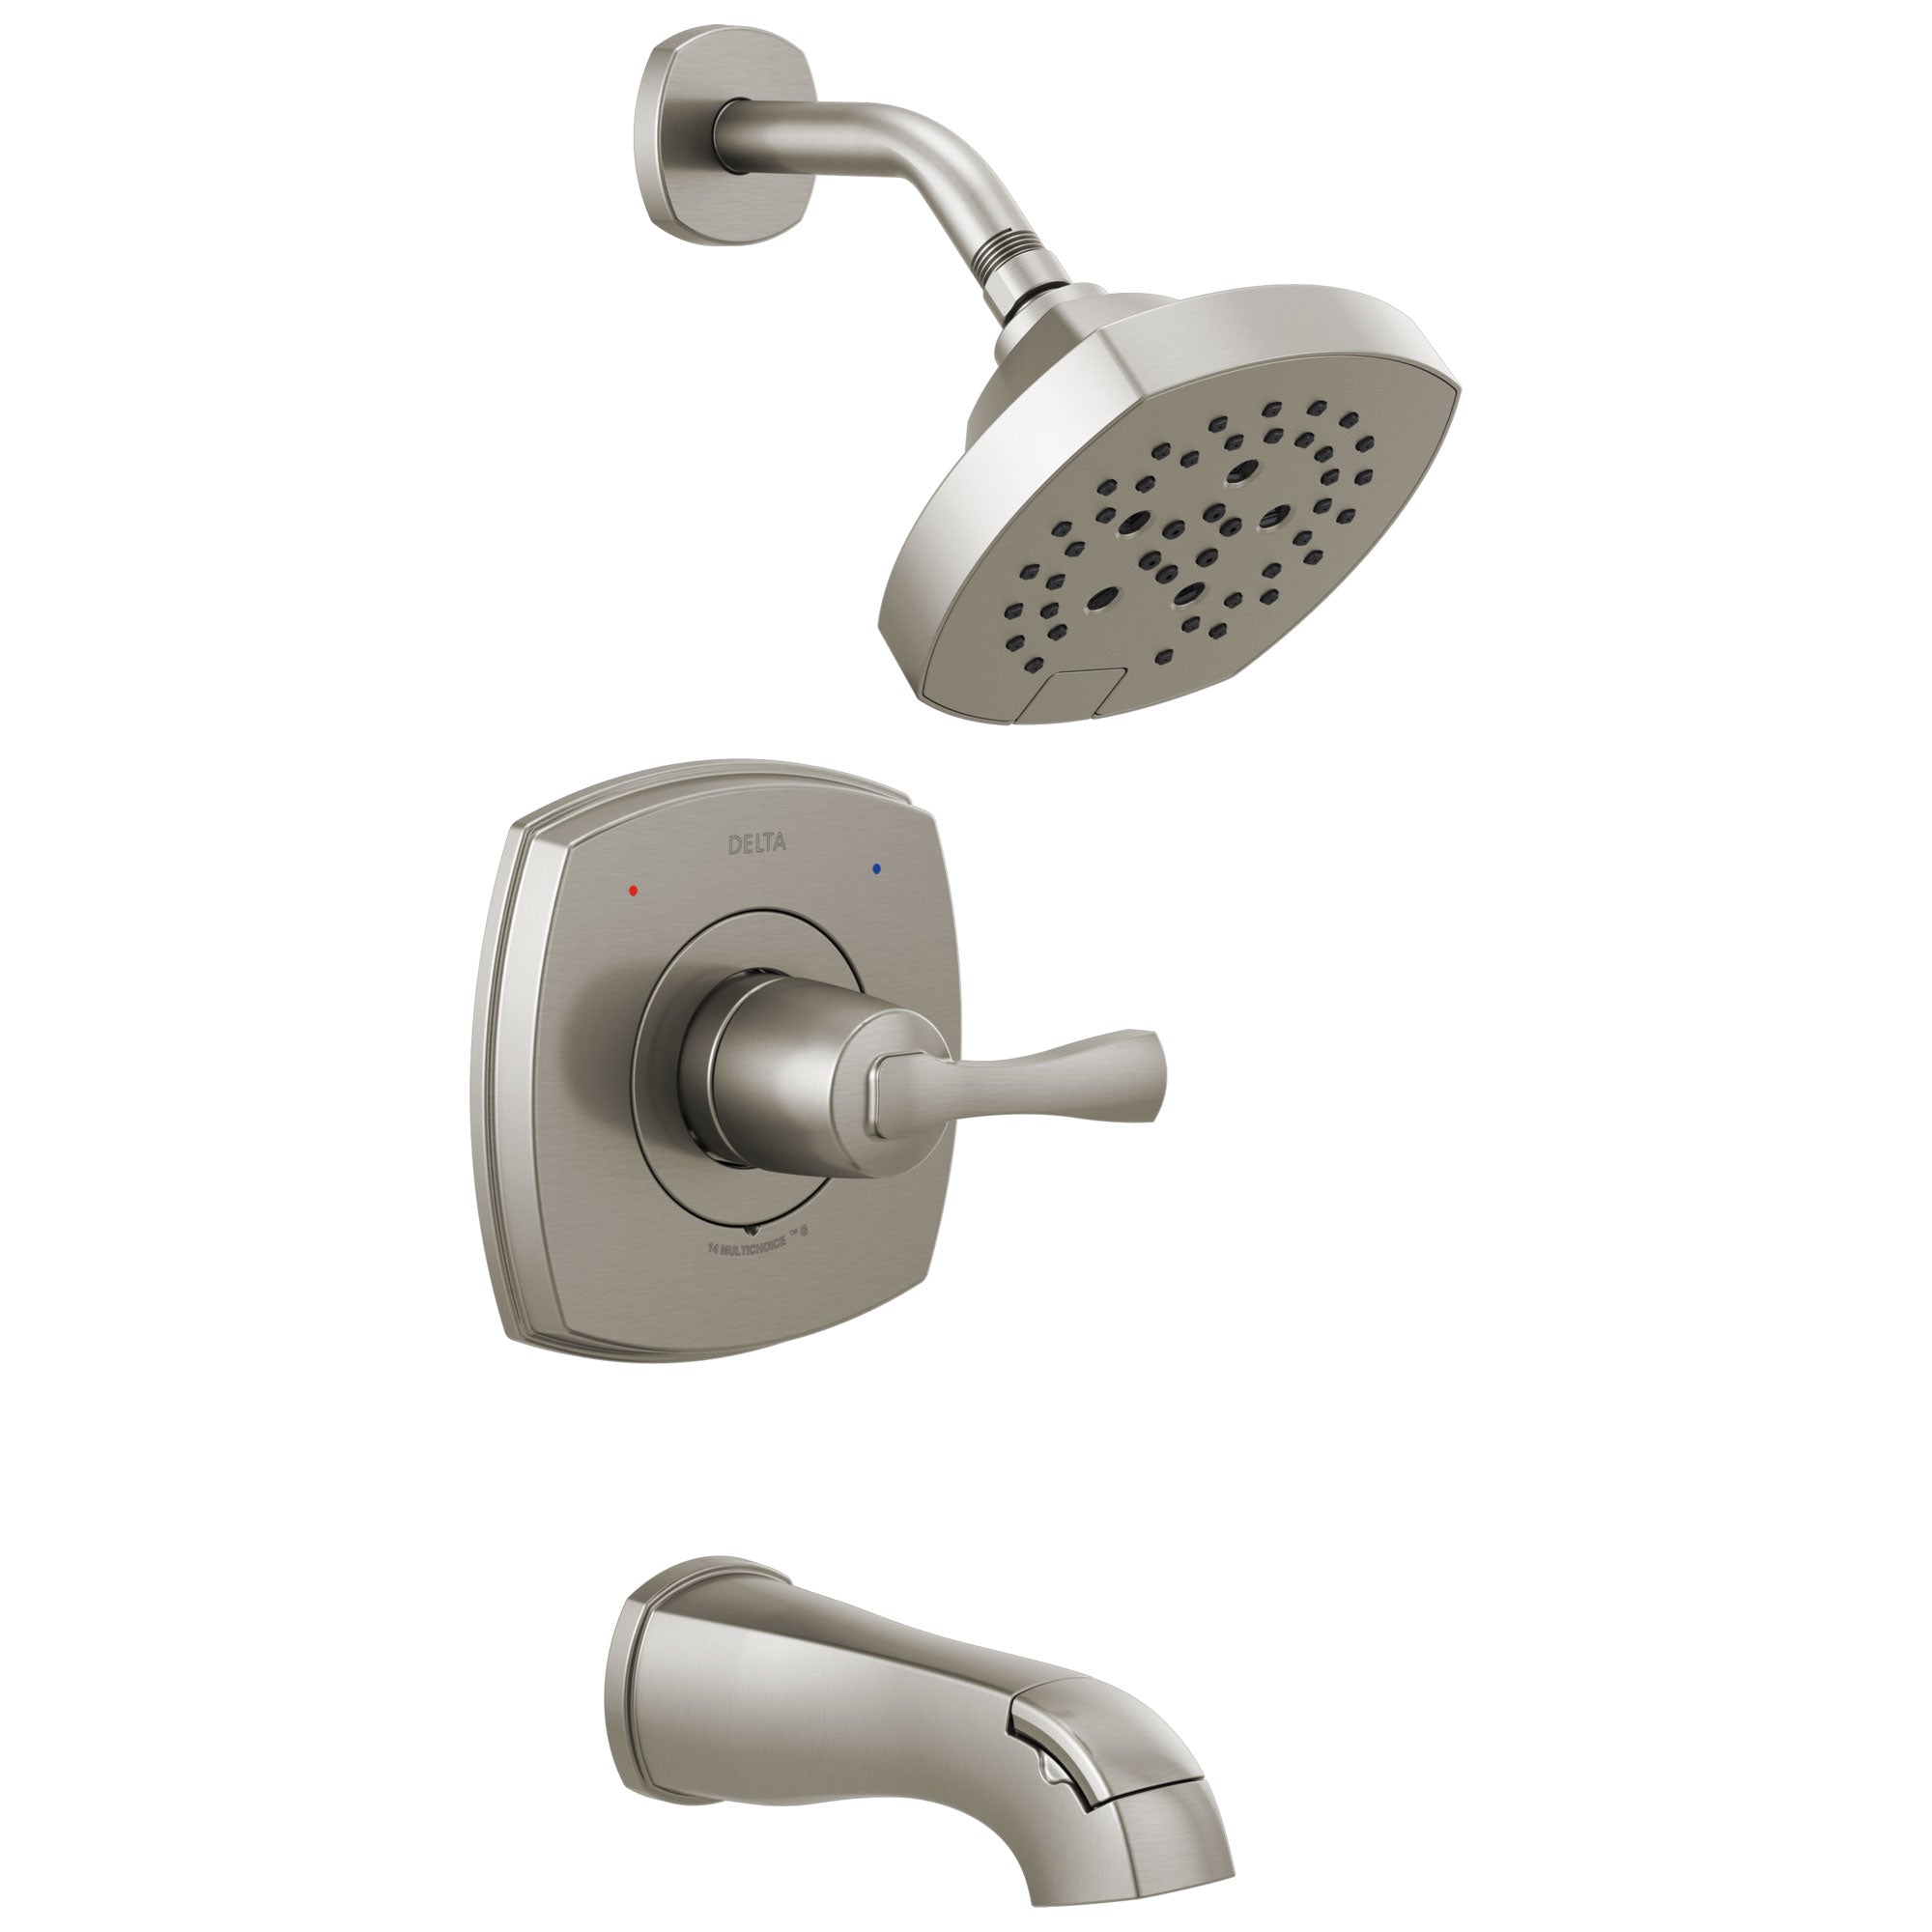 Delta Stryke Stainless Steel Finish 14 Series Single Handle Tub and Shower Combination Faucet Trim Kit (Requires Valve) DT14476SS